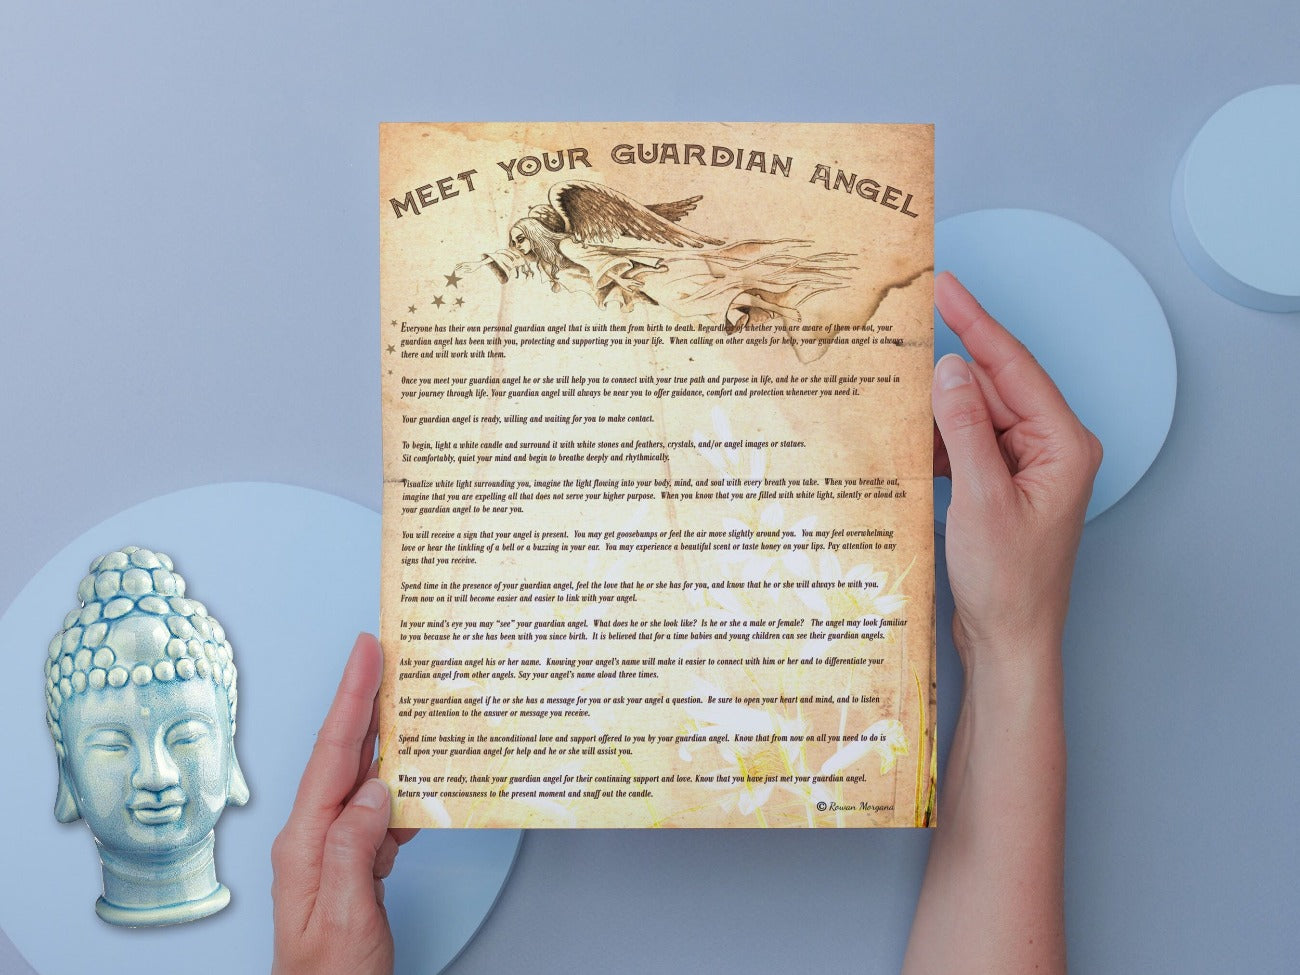 MEET Your GUARDIAN ANGEL Printable held in two hands. GUARDIAN ANGEL a Ritual to Meet Guardian Angel, Wicca Witchcraft, Light Worker Magic, Angel Guidance Folklore, Journal Grimoire Printable - Morgana Magick Spell